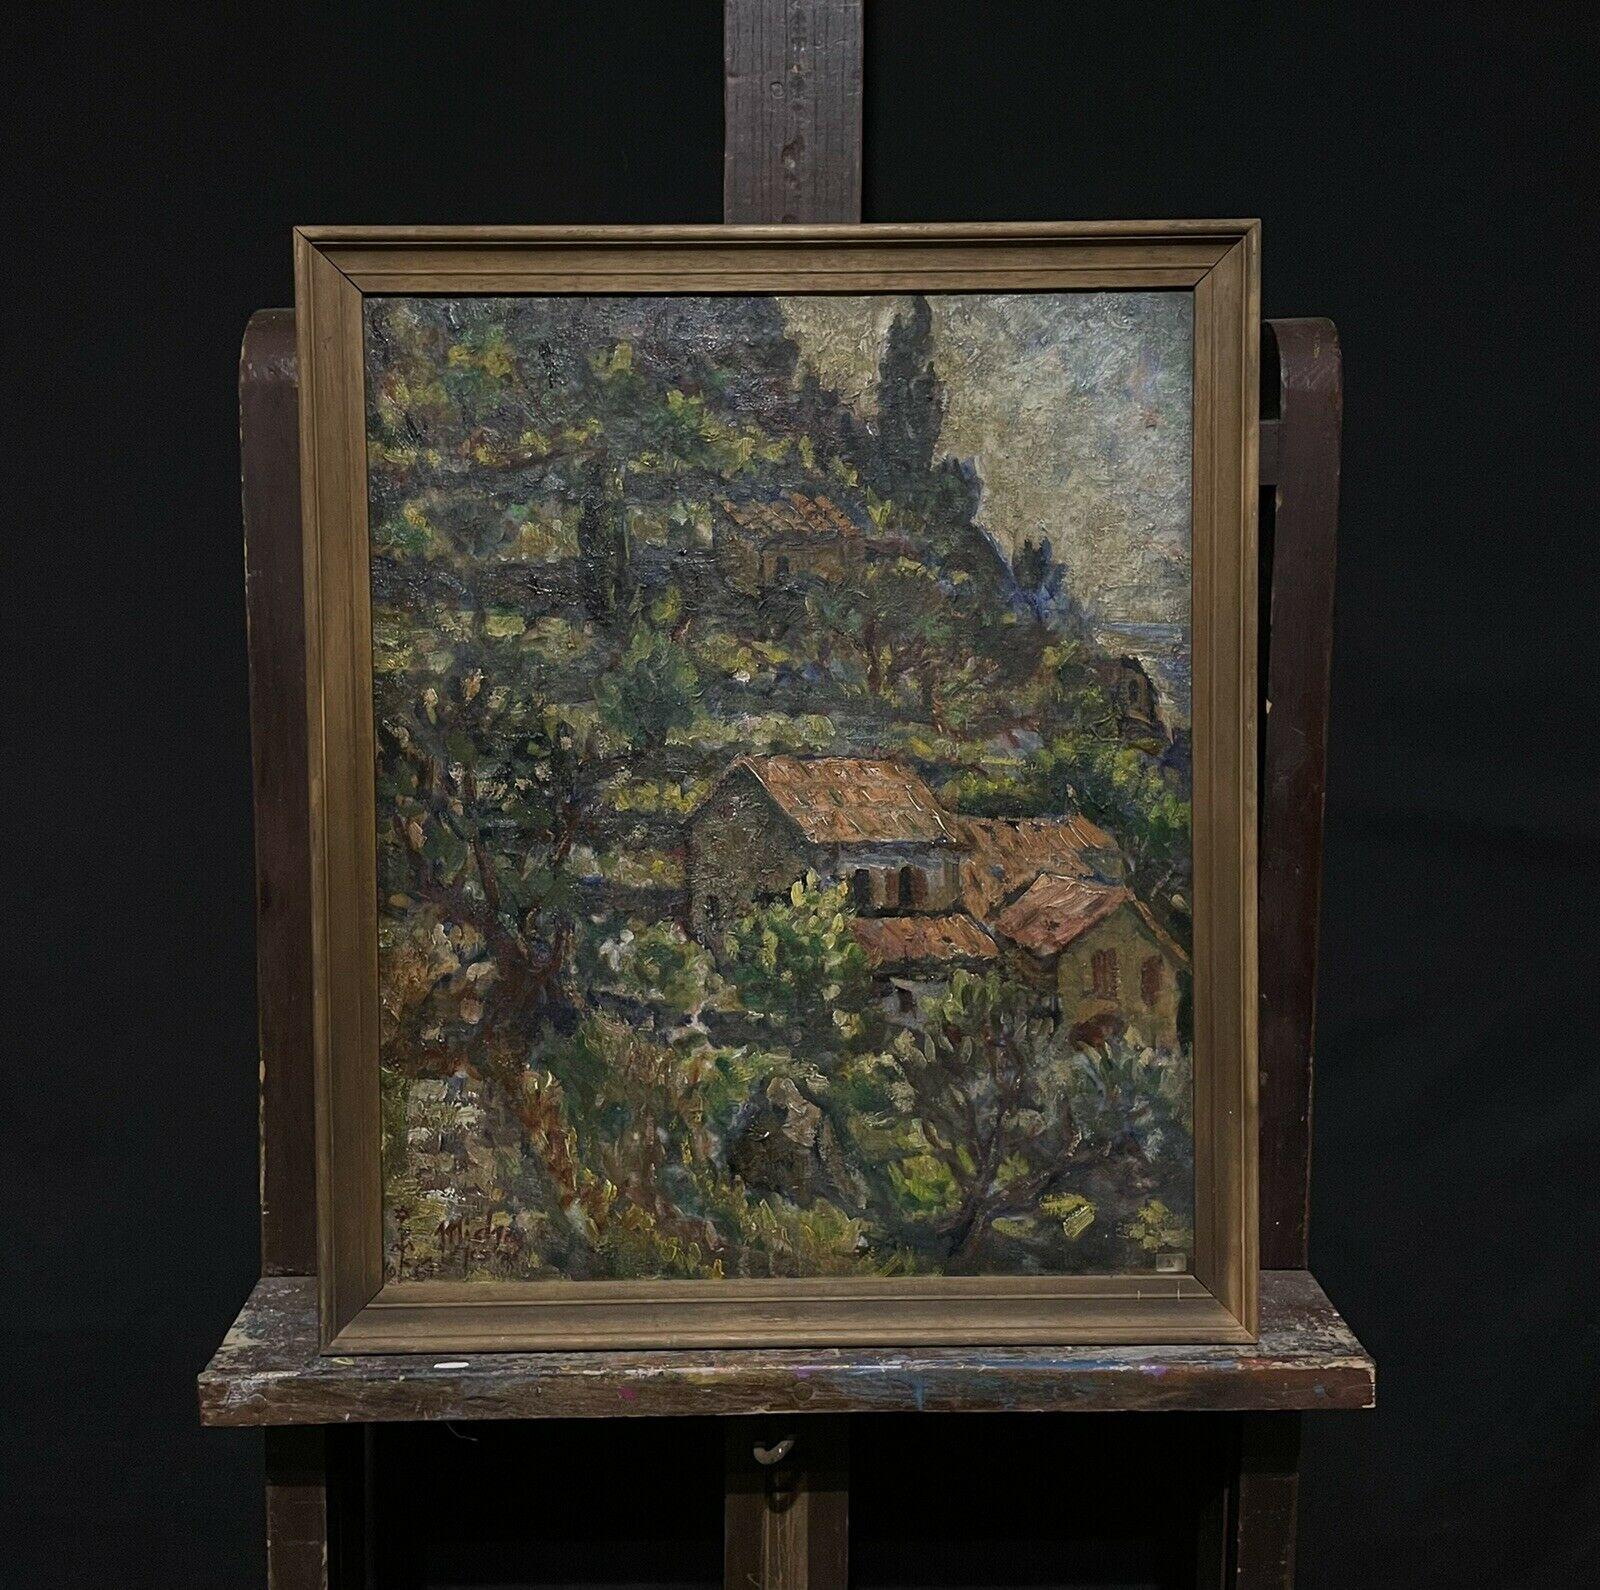 Artist/ School: French School, mid 20th century, signed

Title: Houses in sloping Provencal landscape

Medium:  signed oil painting on canvas, framed.

framed:  23.5 x 20 inches
canvas:   21.75 x 18 inches  

Provenance: private collection,